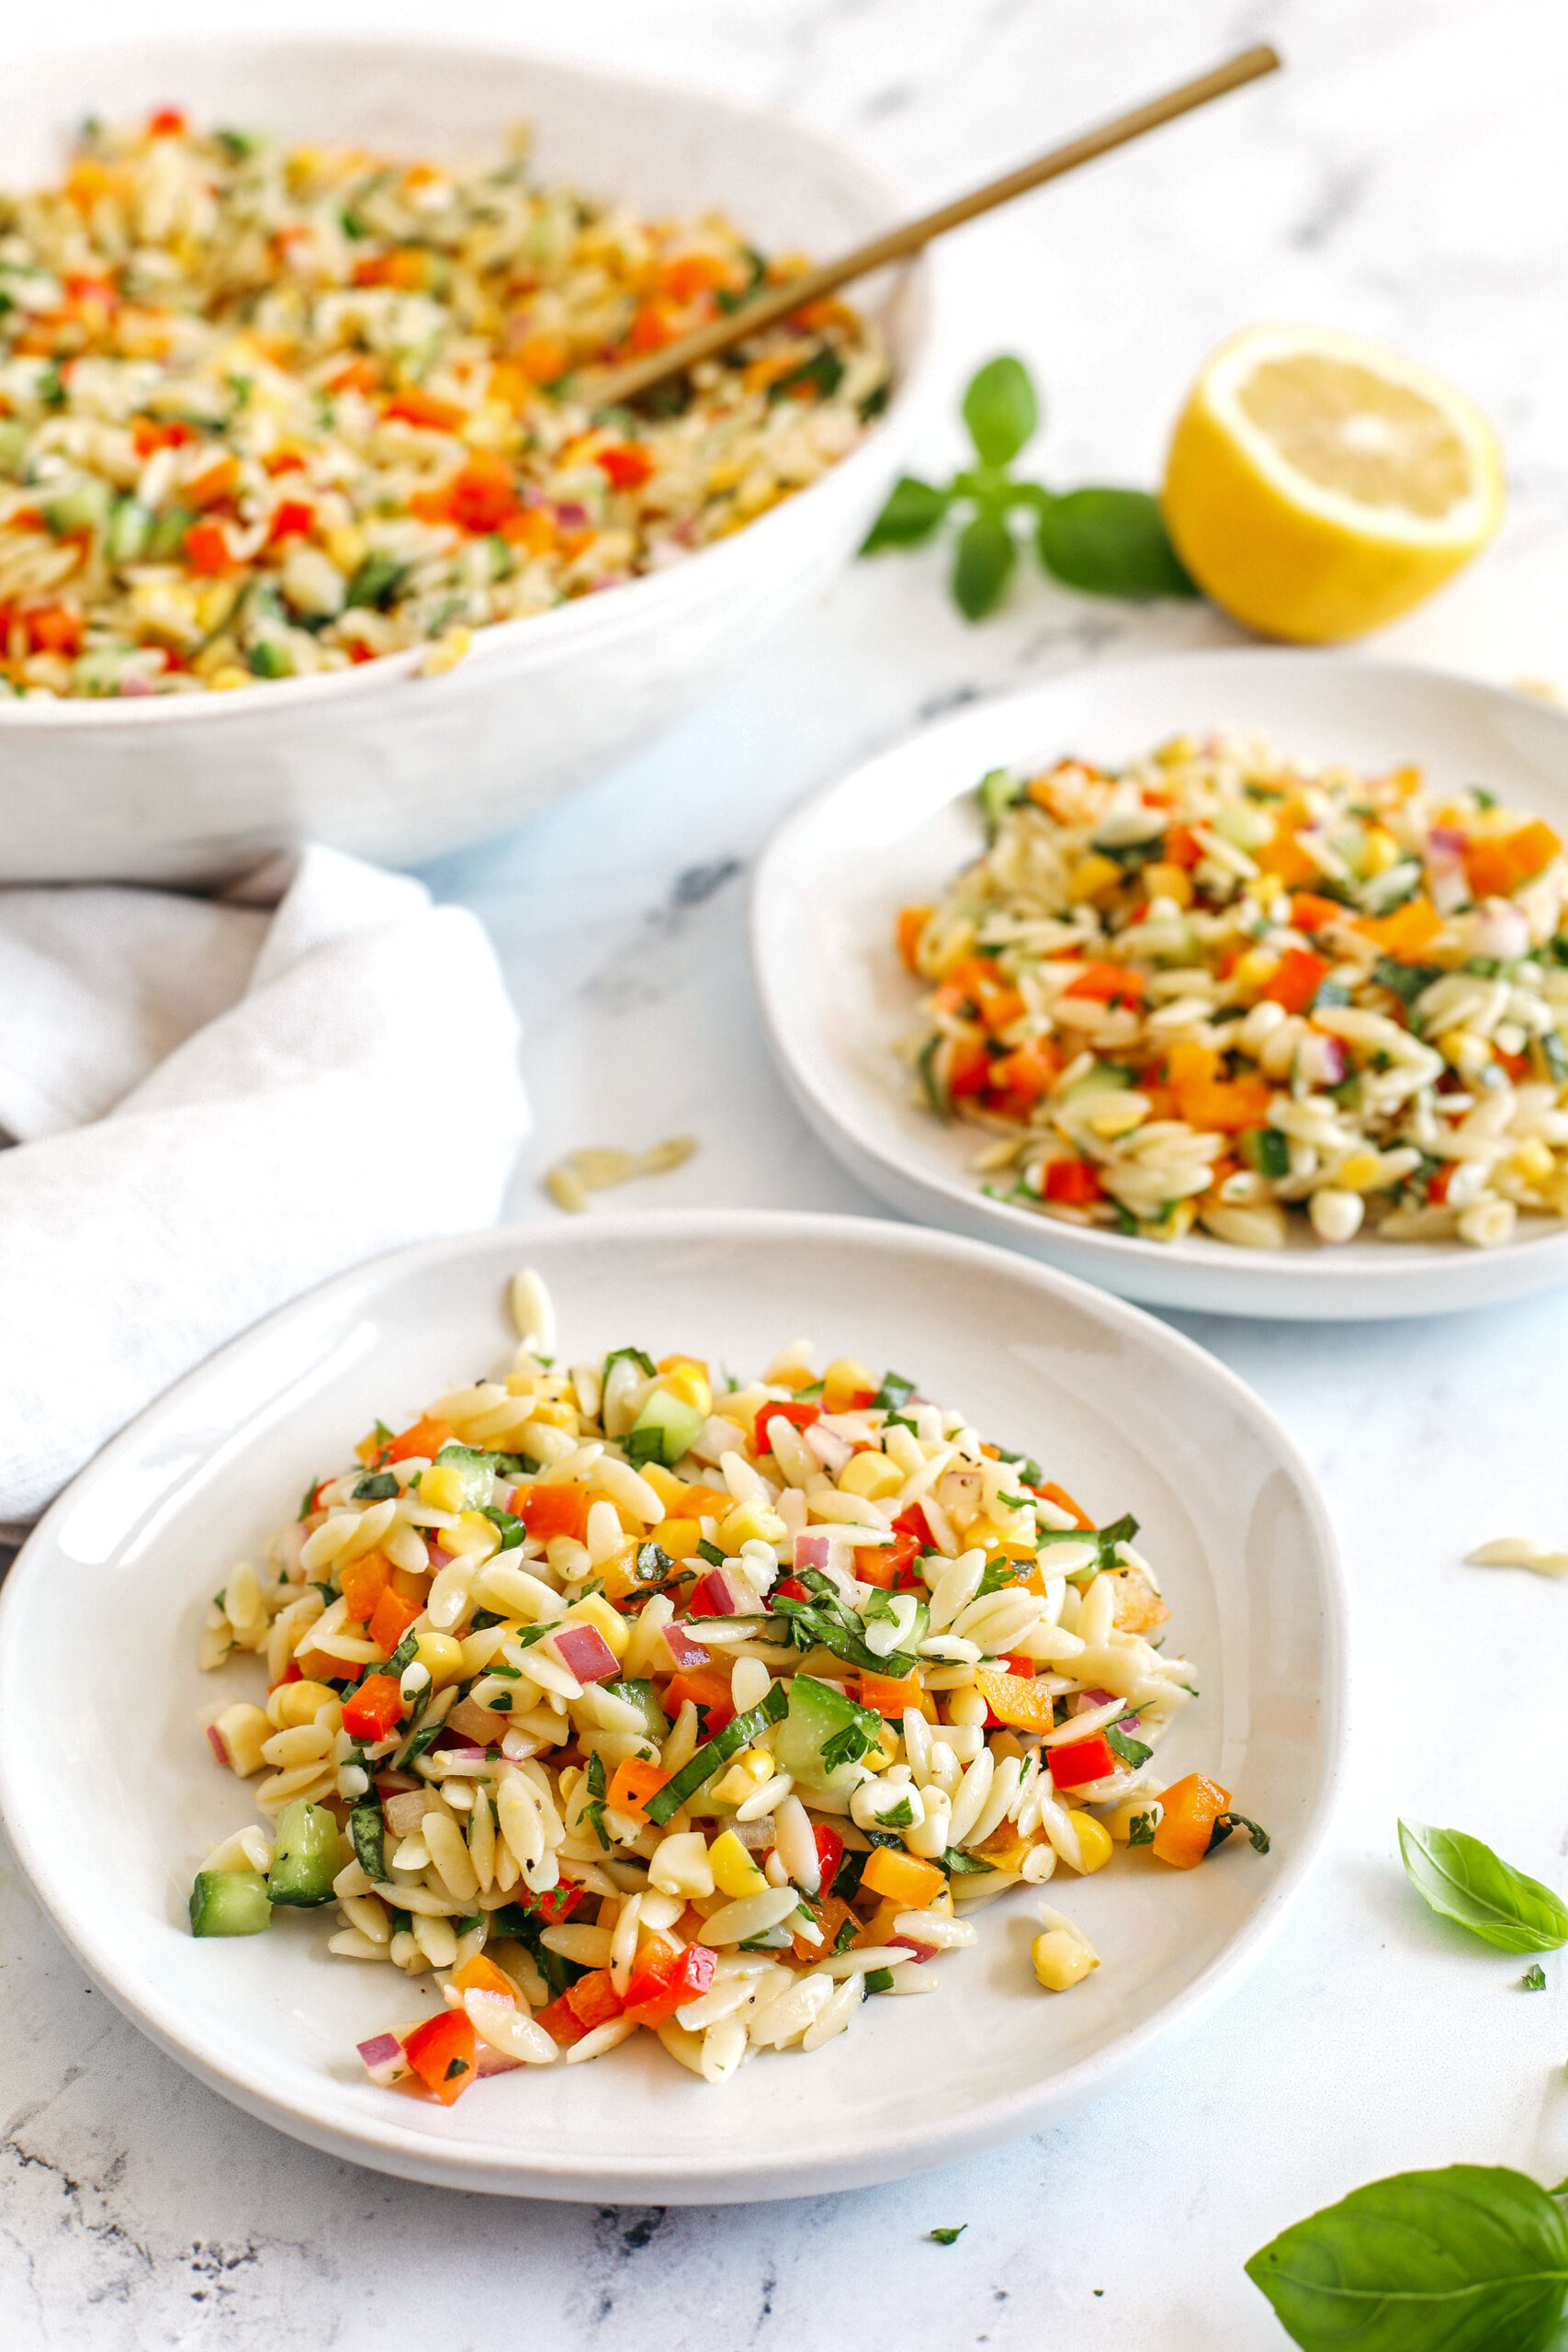 This Rainbow Orzo Salad makes the perfect summer side dish!  Loaded with colorful veggies, fresh herbs and tender orzo pasta, all tossed together with a delicious lemon herb dressing and easily made in just minutes!